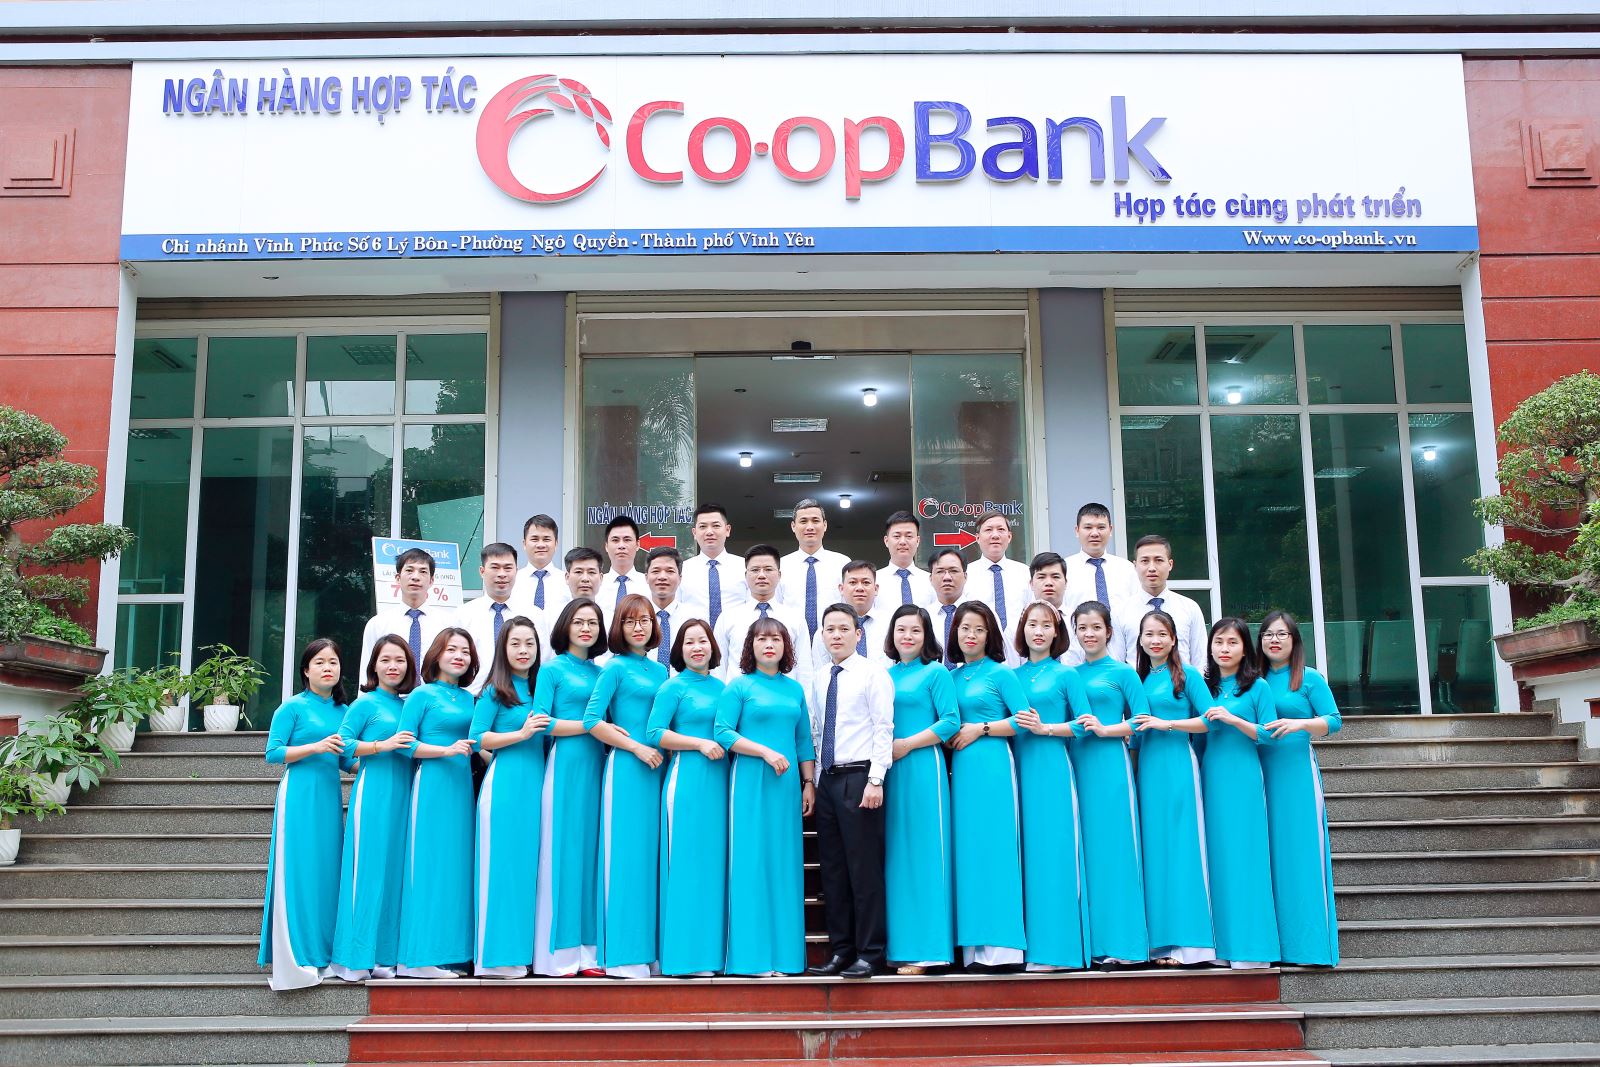 Latest procedures for granting licenses for the establishment and operation of cooperative banks in Vietnam